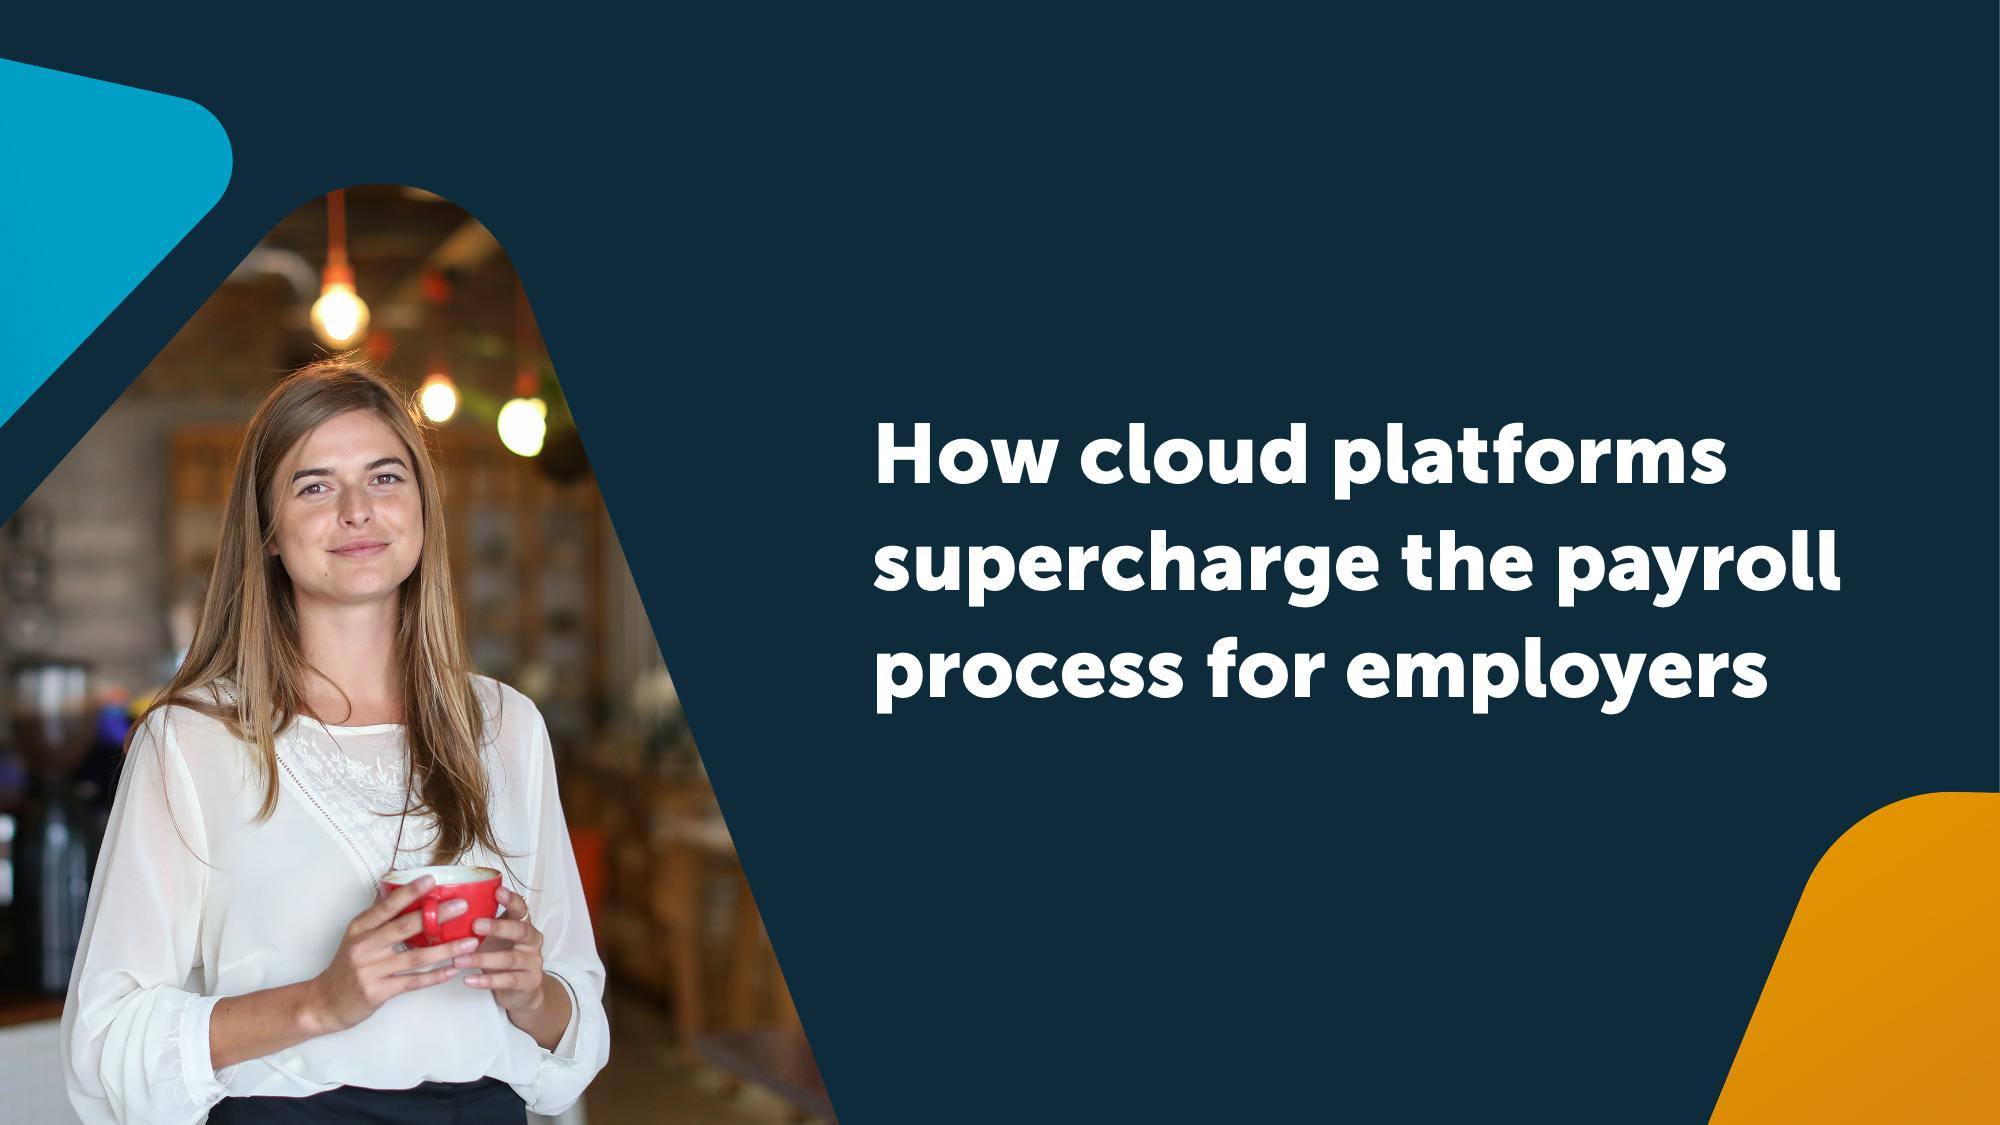 How cloud platforms supercharge the payroll process for employers